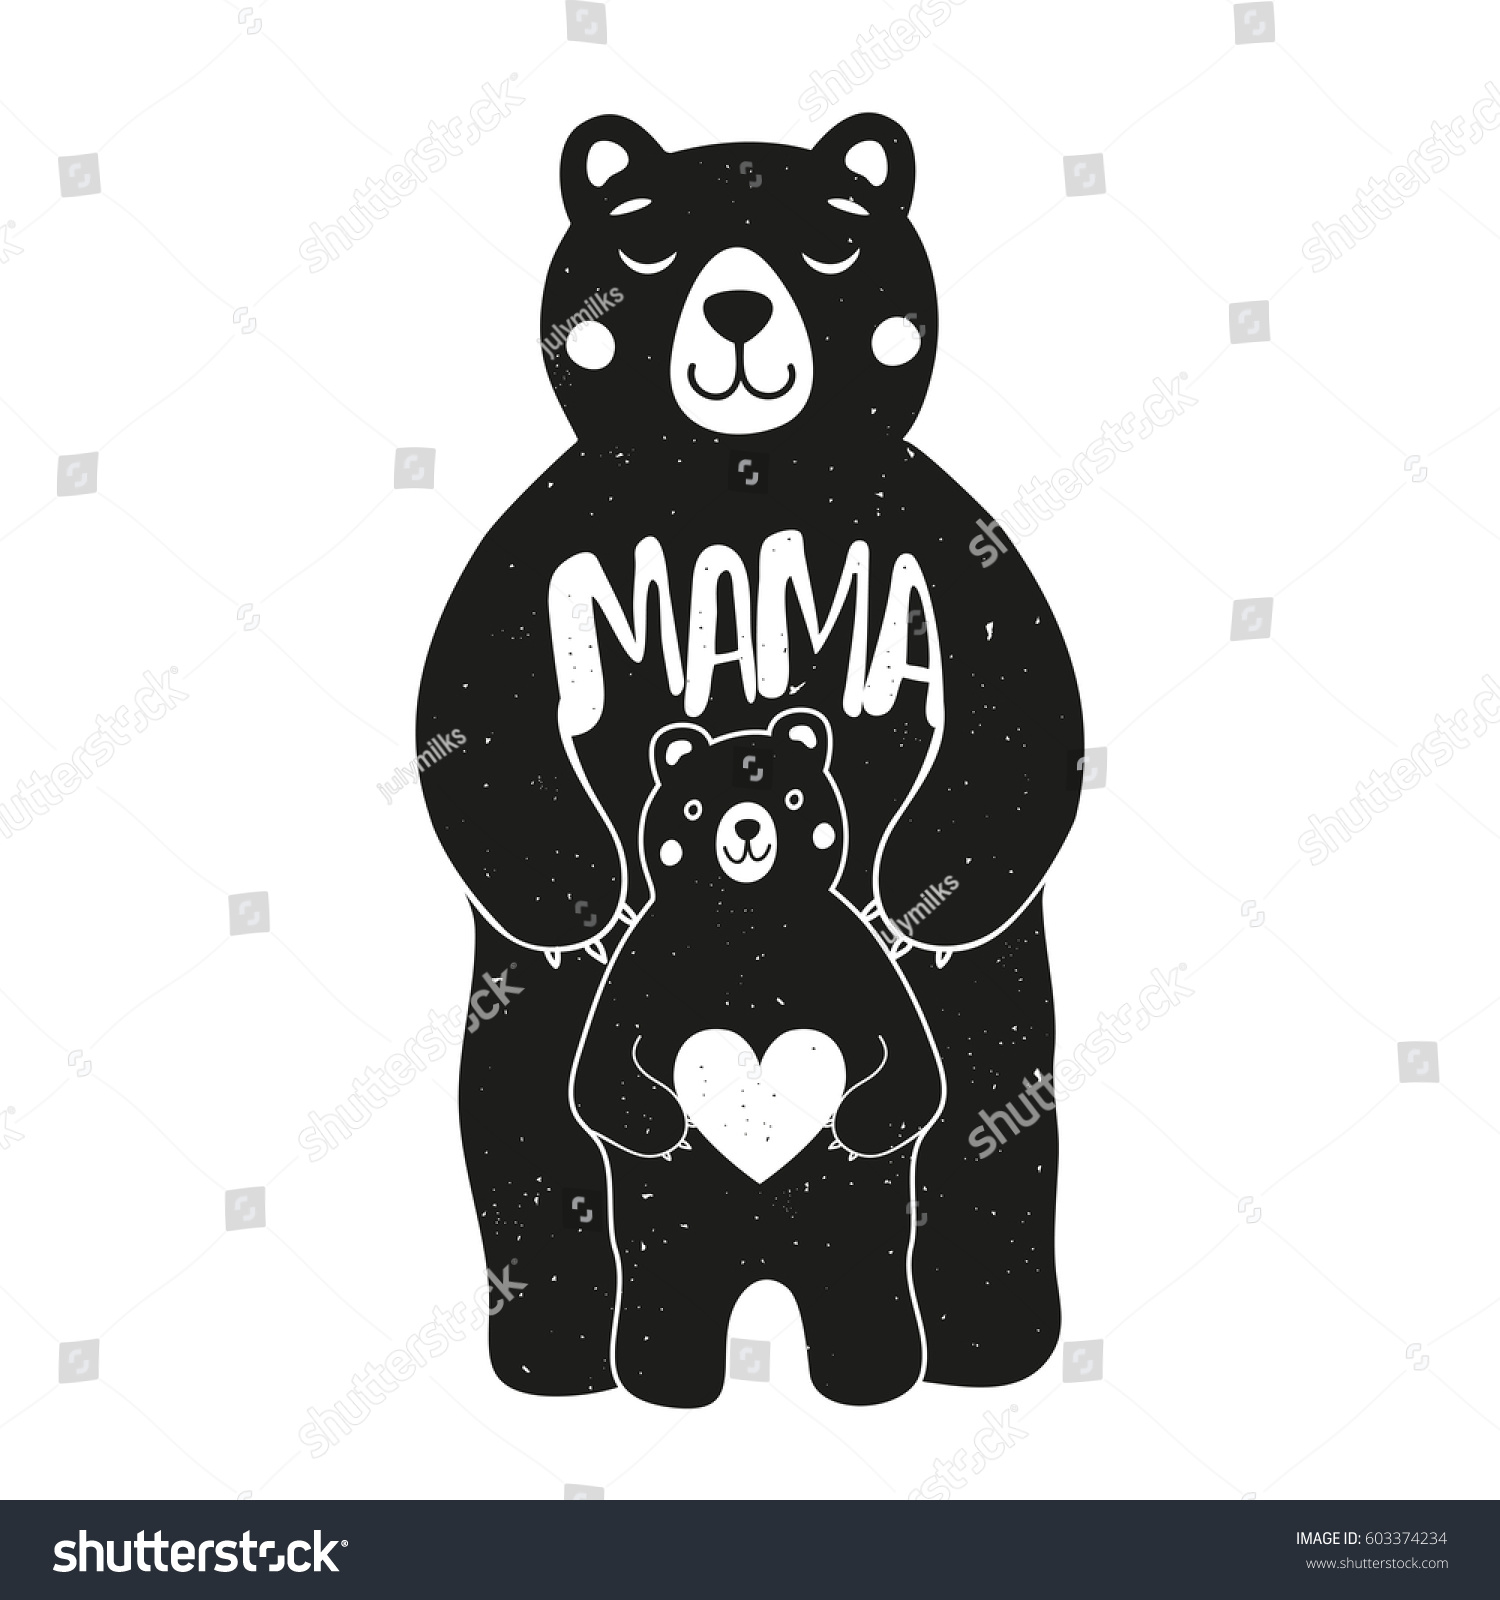 SVG of Cute vector typography poster with mother bear and baby holding white heart. Illustration with lettering word - Mama. Print design, Mother's day greeting card art svg